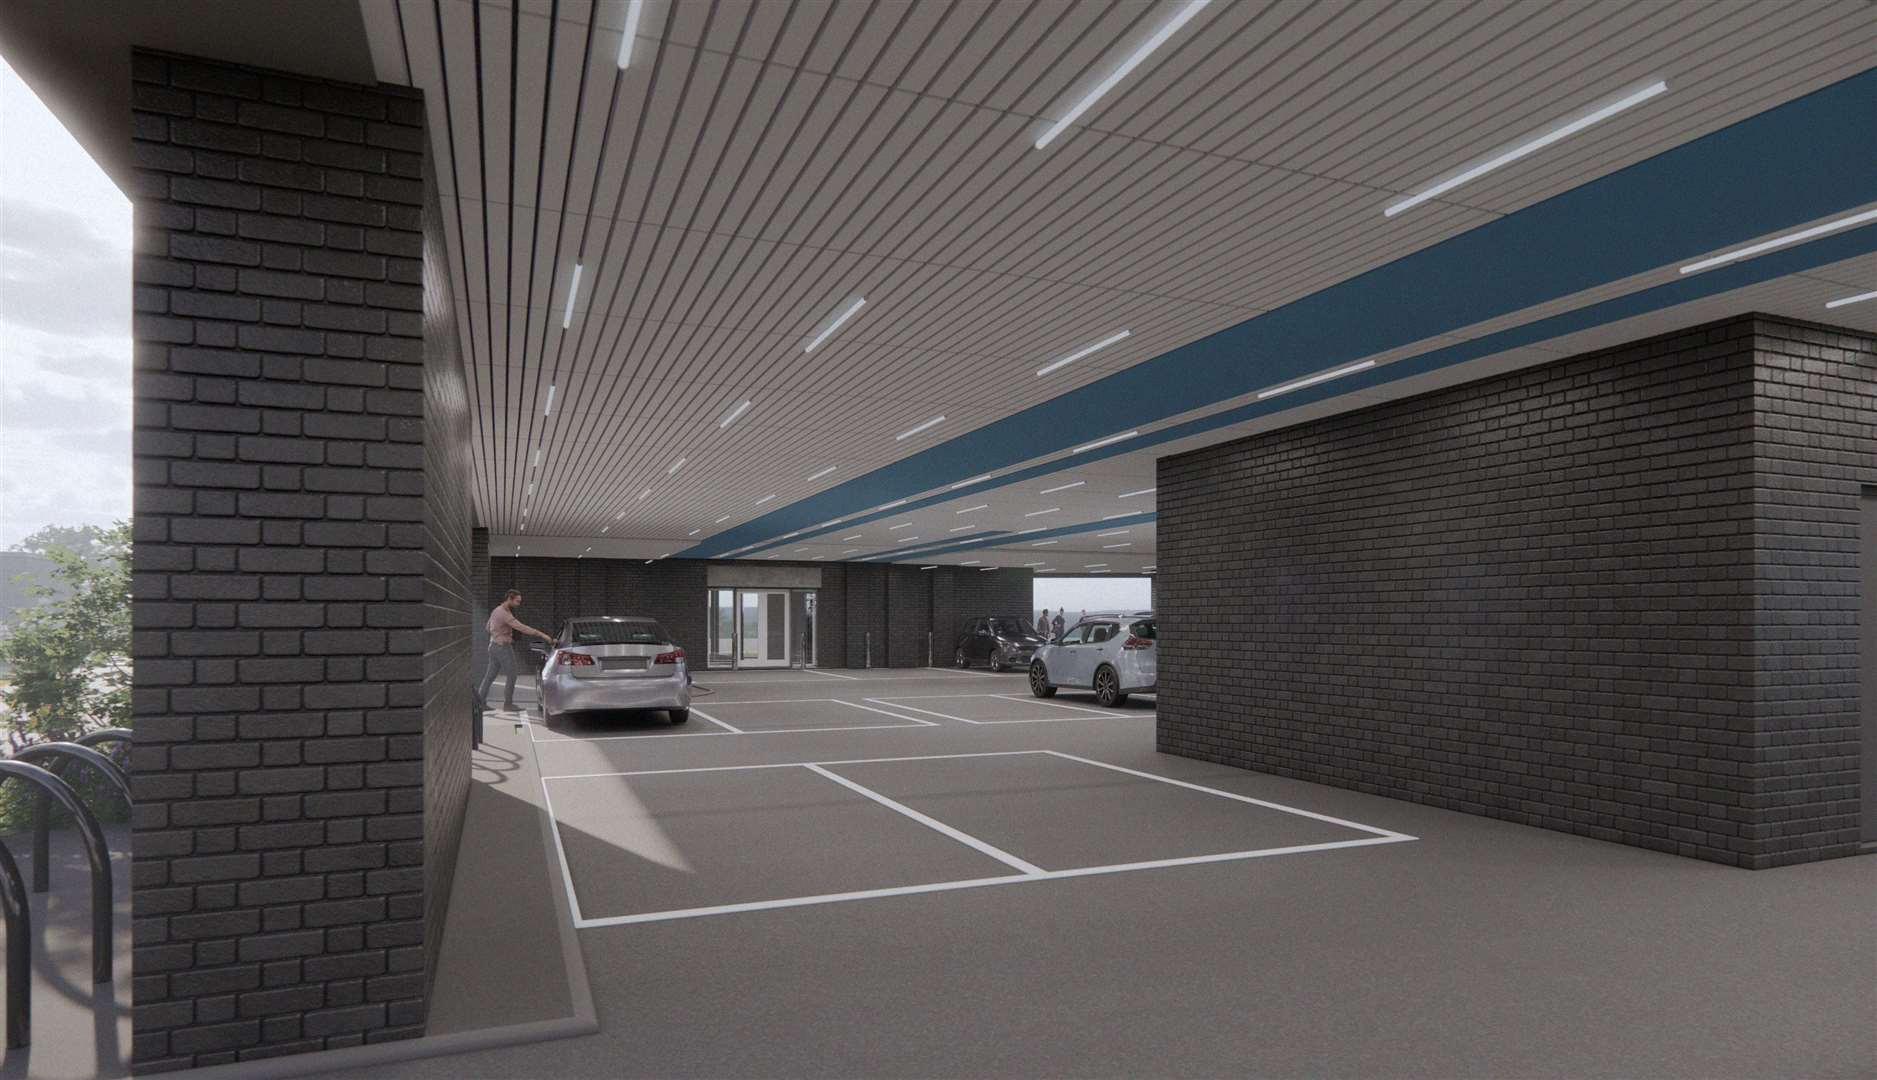 The new super surgery planned will offer pre-bookable parking slots if approved